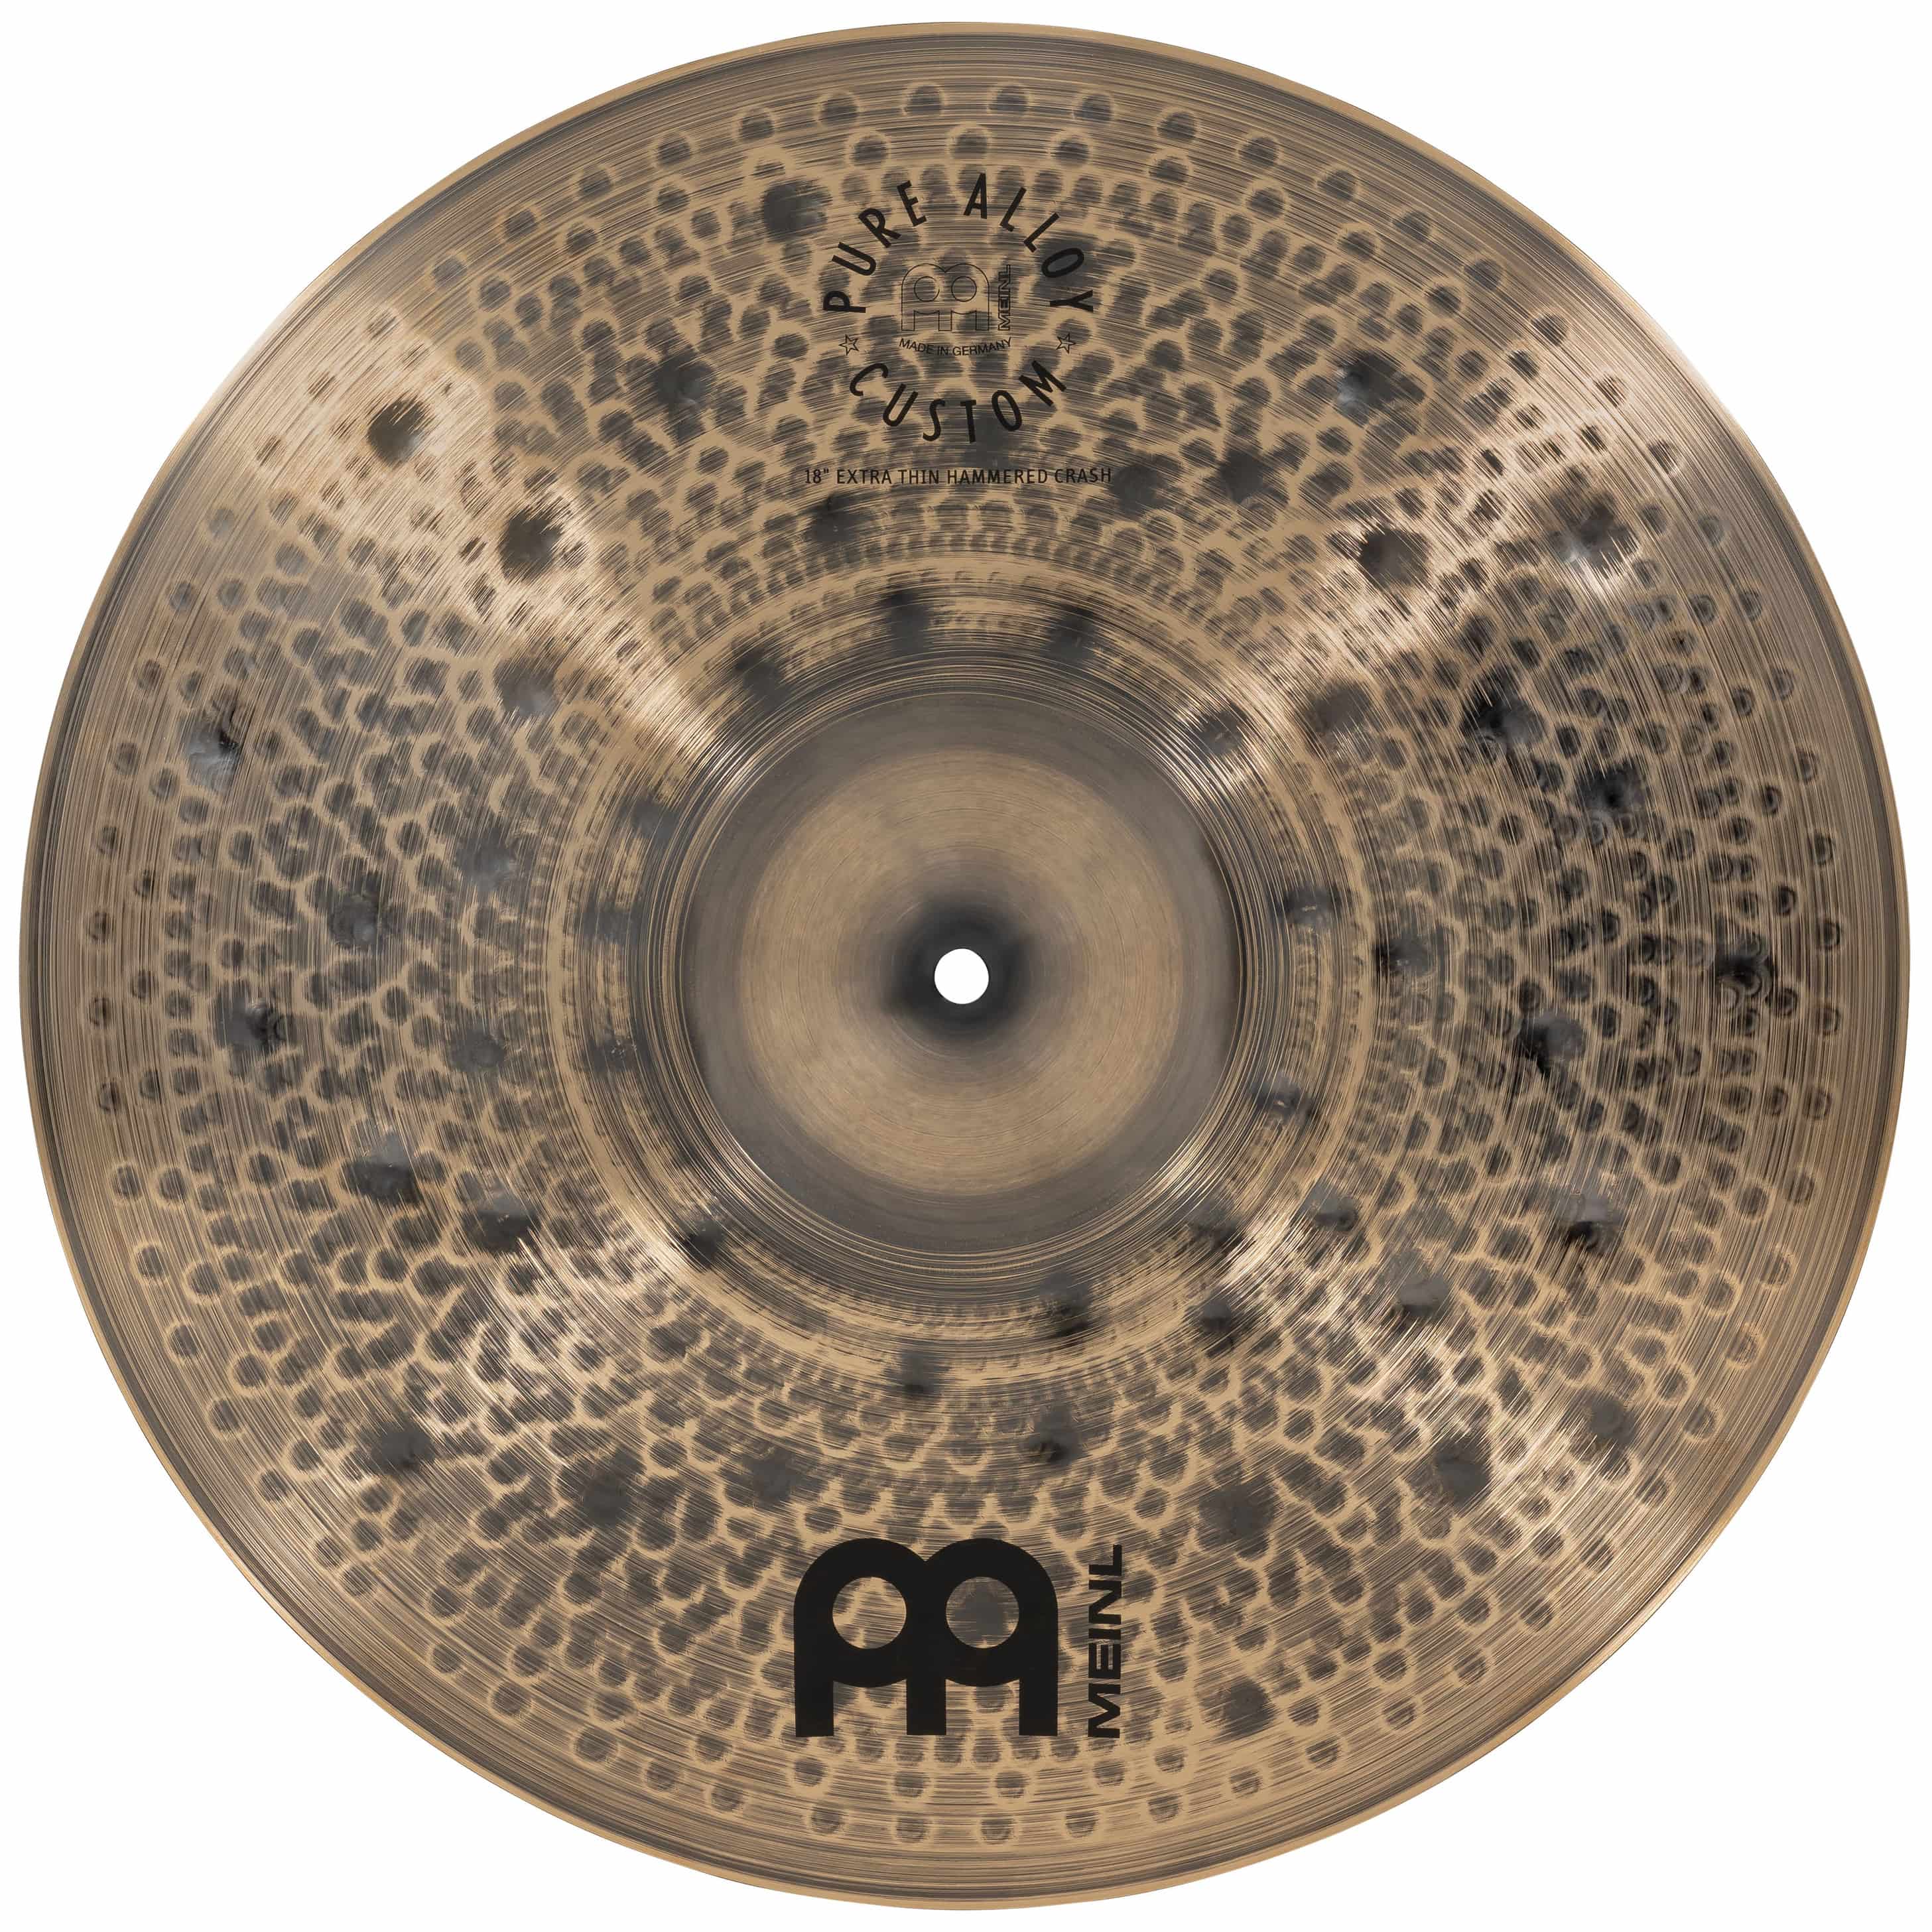 Meinl Cymbals PAC18ETHC - 18" Pure Alloy Custom Extra Thin Hammered Crash